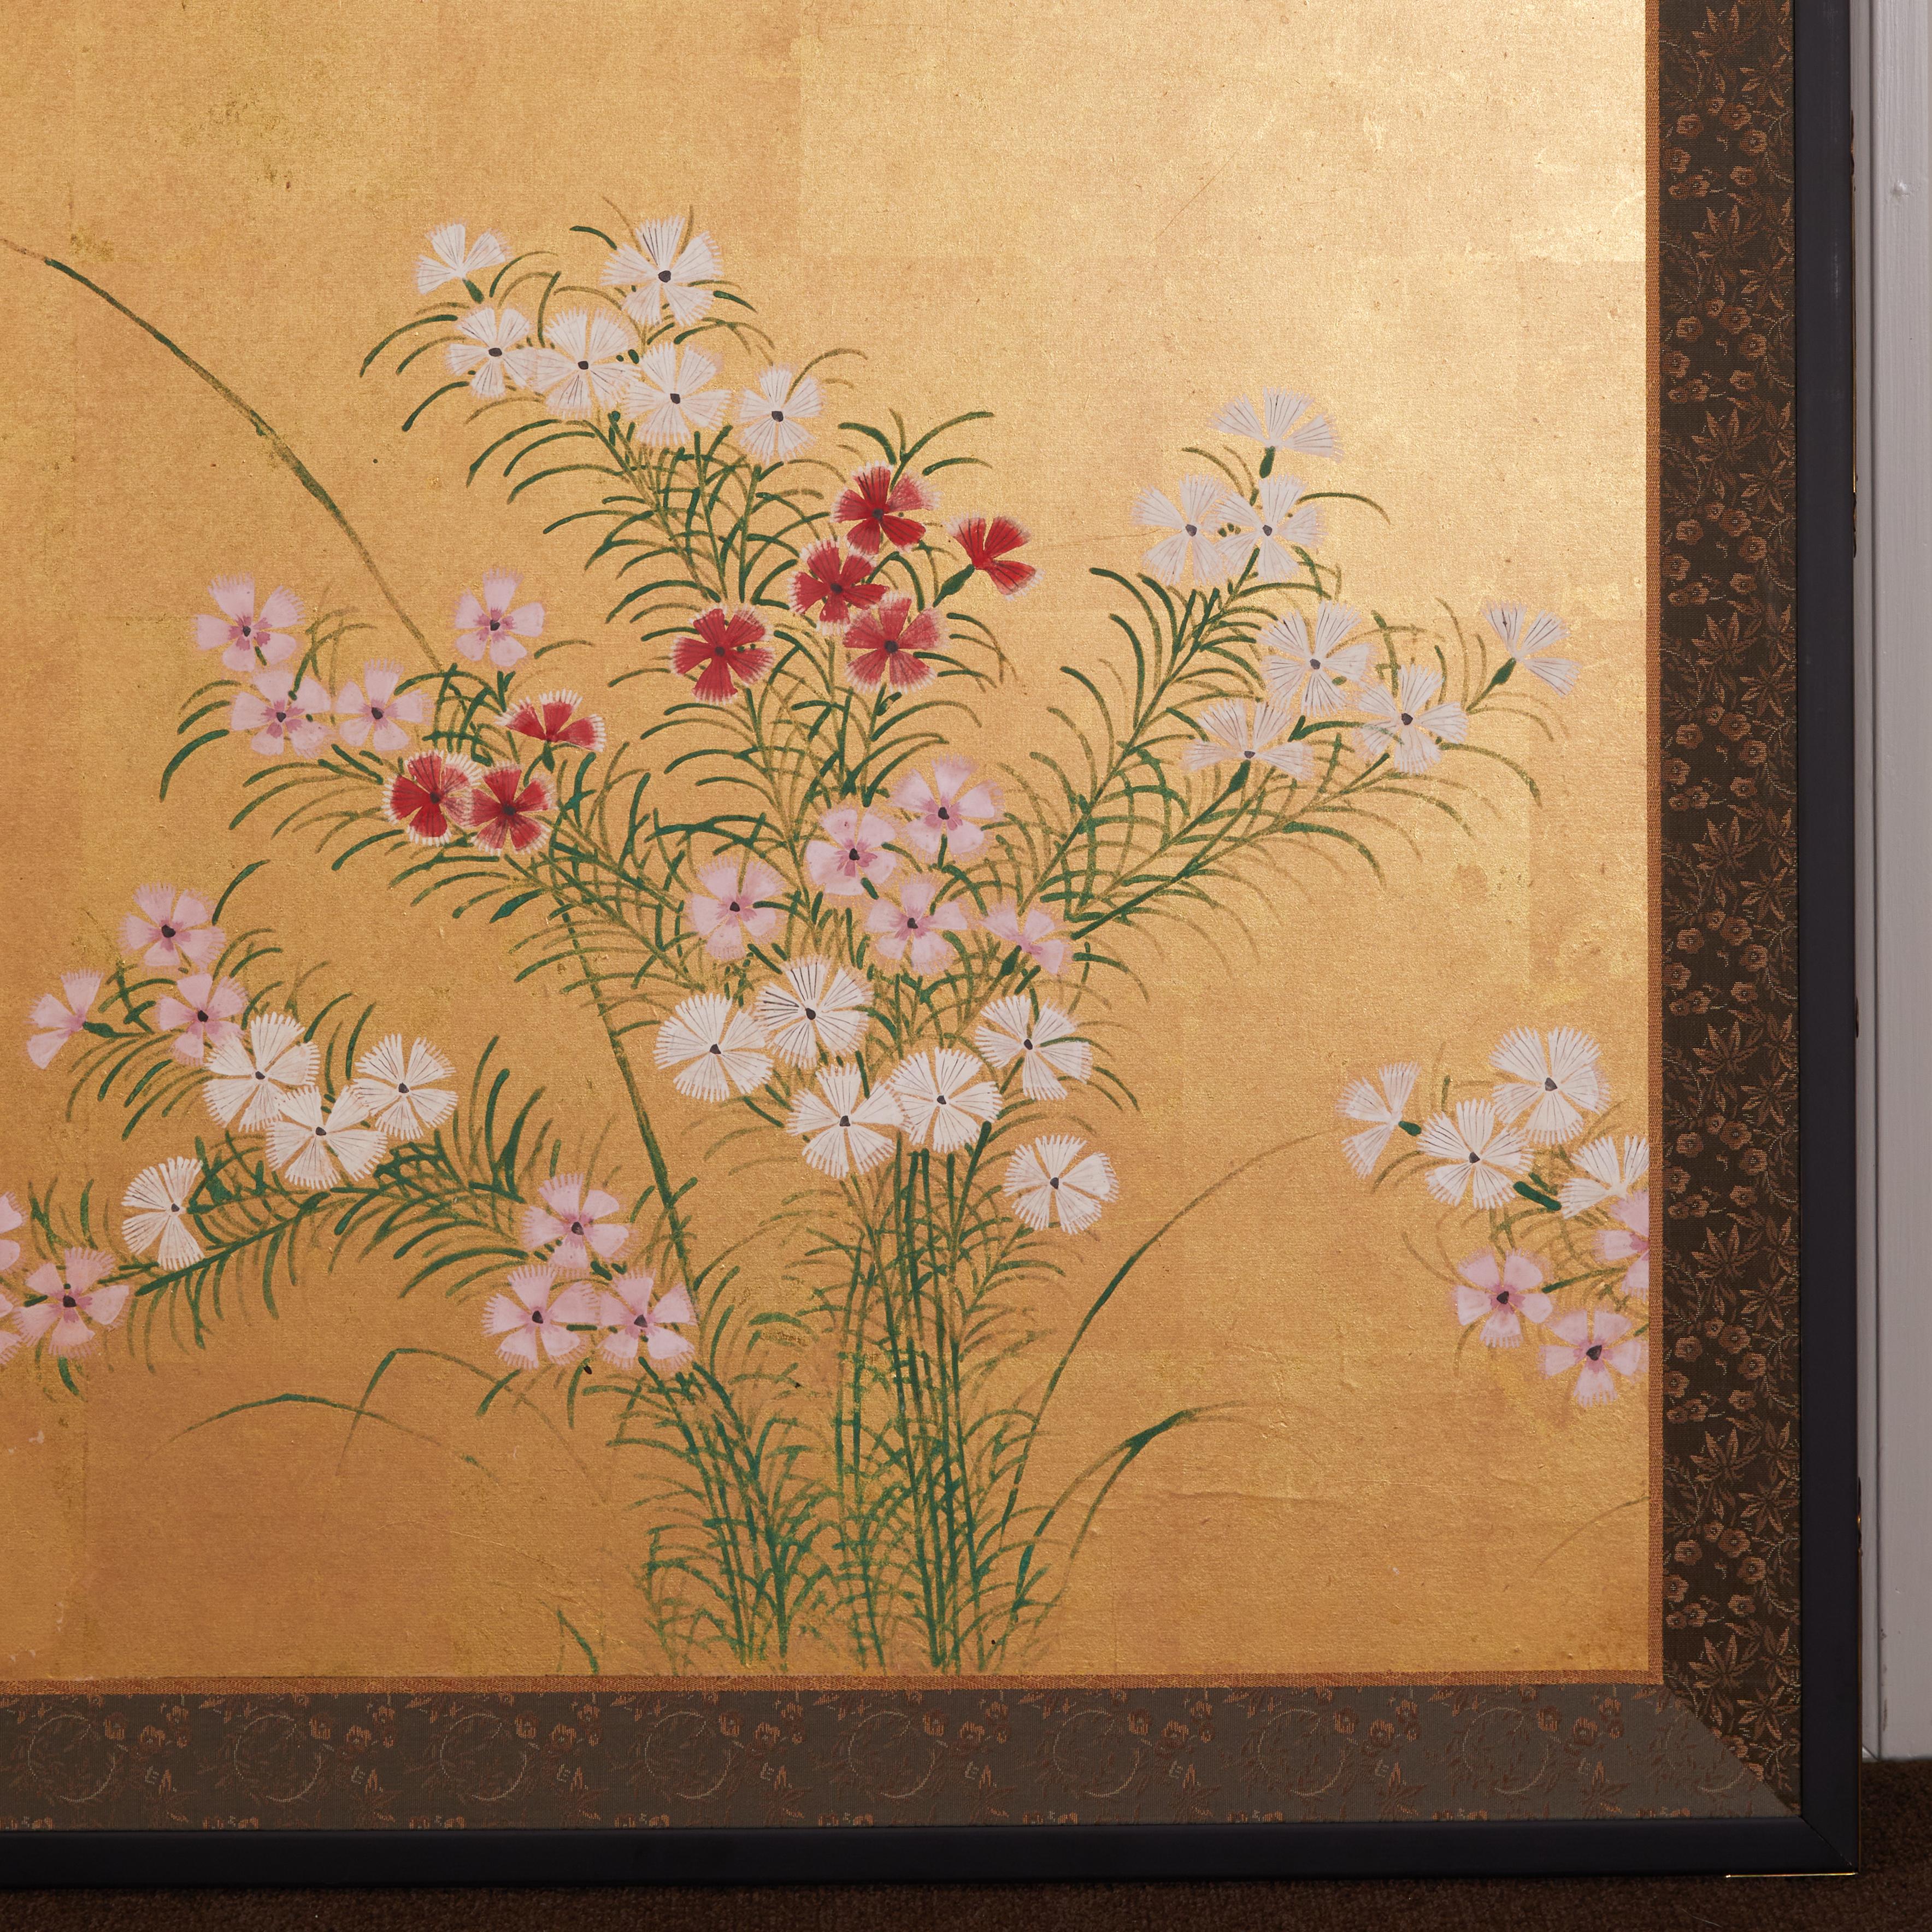 Nadeshiko, also known as fringed pinks is a flowering plant native to Japan.  Ink, mineral pigments and 18th century gold leaf, with good veining, on mulberry paper.  Silk brocade border and black lacquer trim with bronze hardware. 